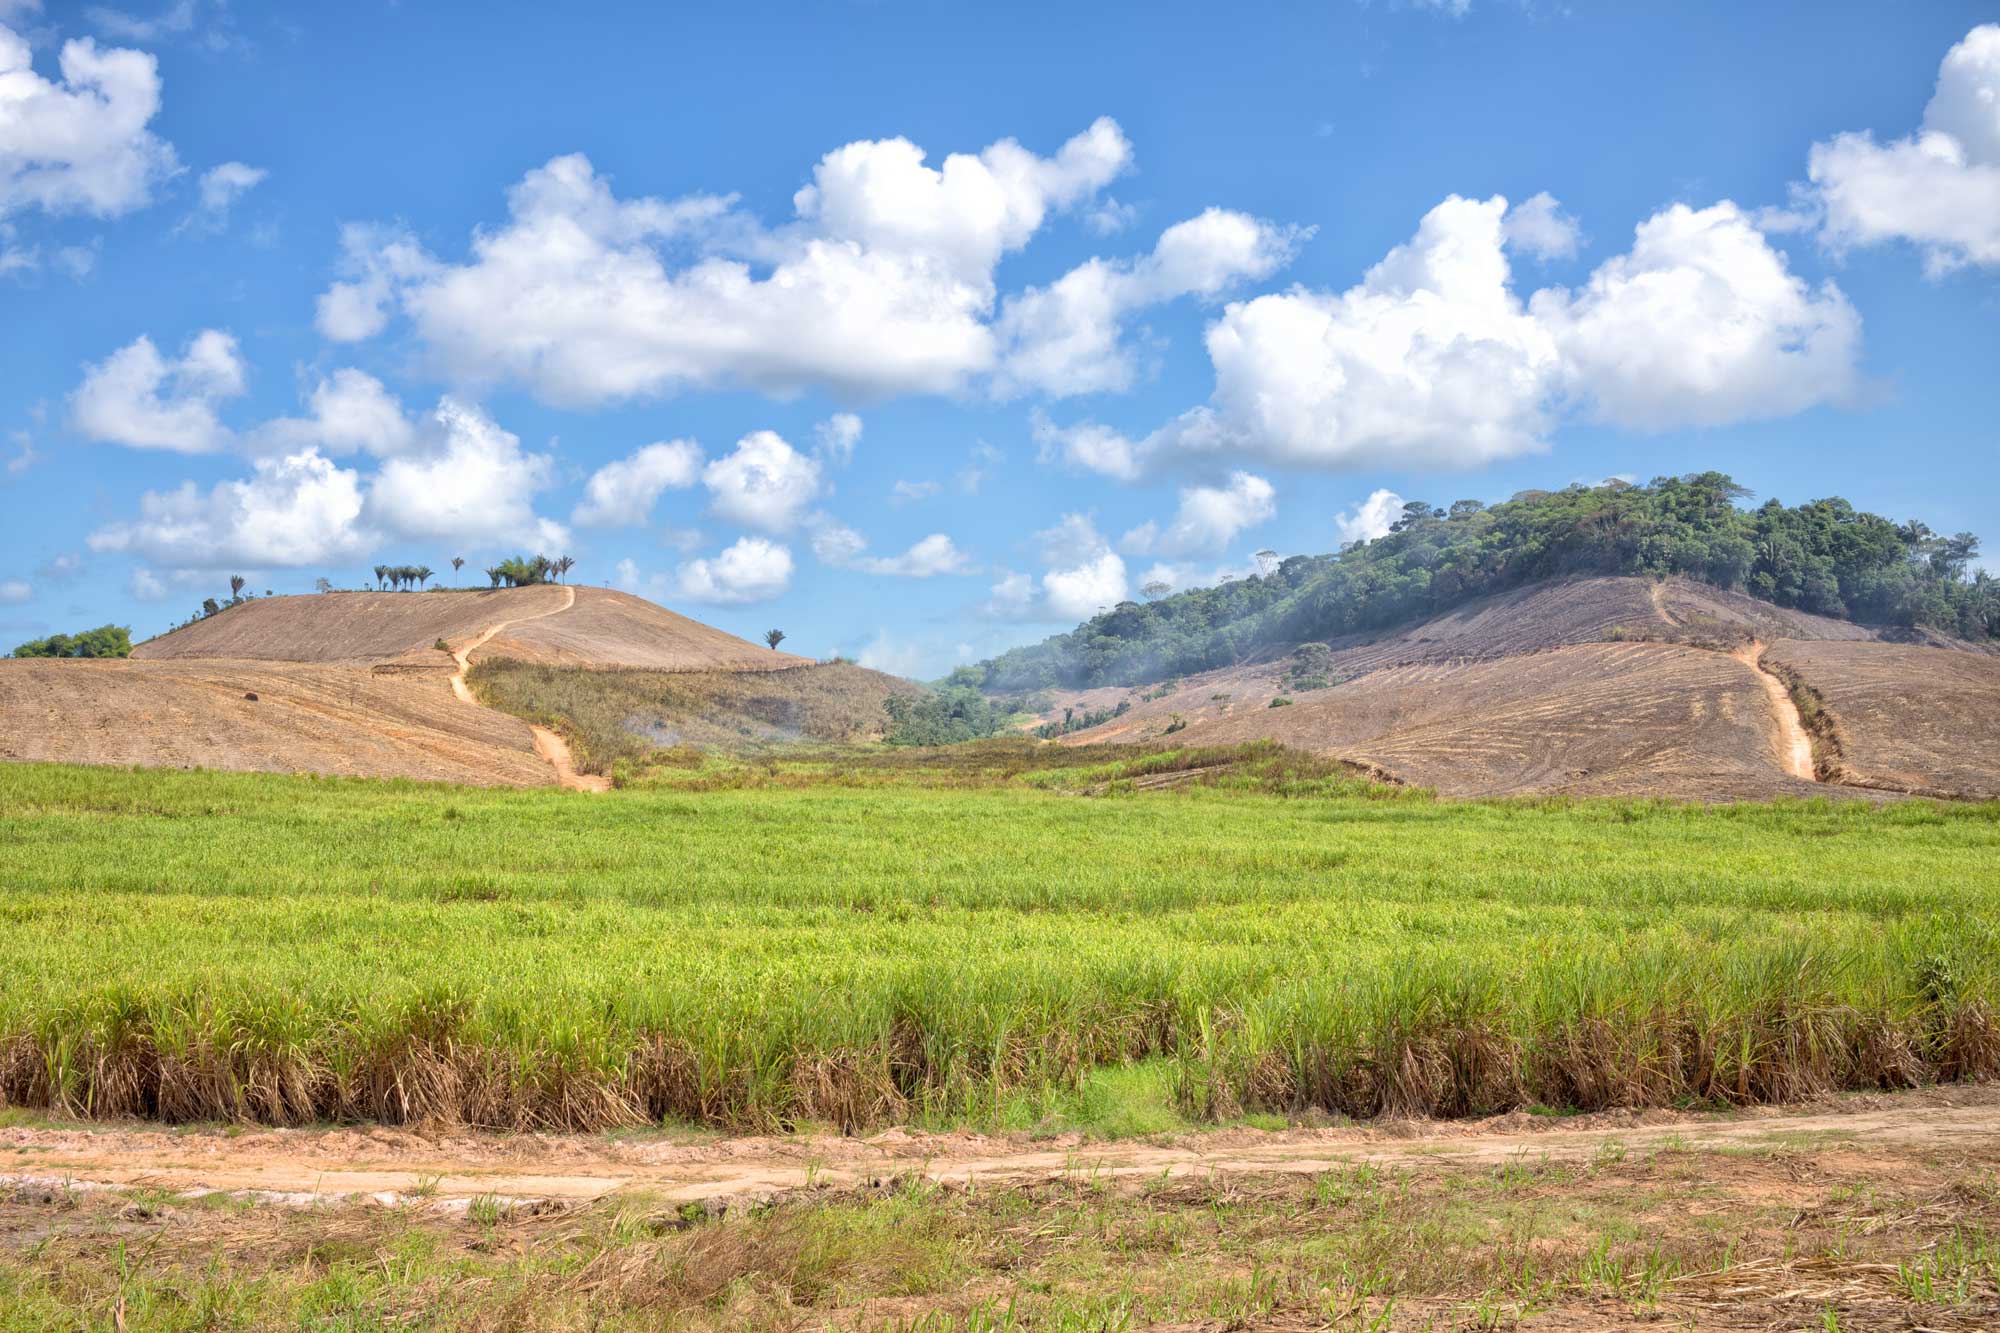 Photograph of a field of sugarcane in Brazil. The photo shows a field of tall sugarcane with green leaves on a flat plain with two hills rising in the background. One of the hills is mostly denuded, whereas the other is partially forested.